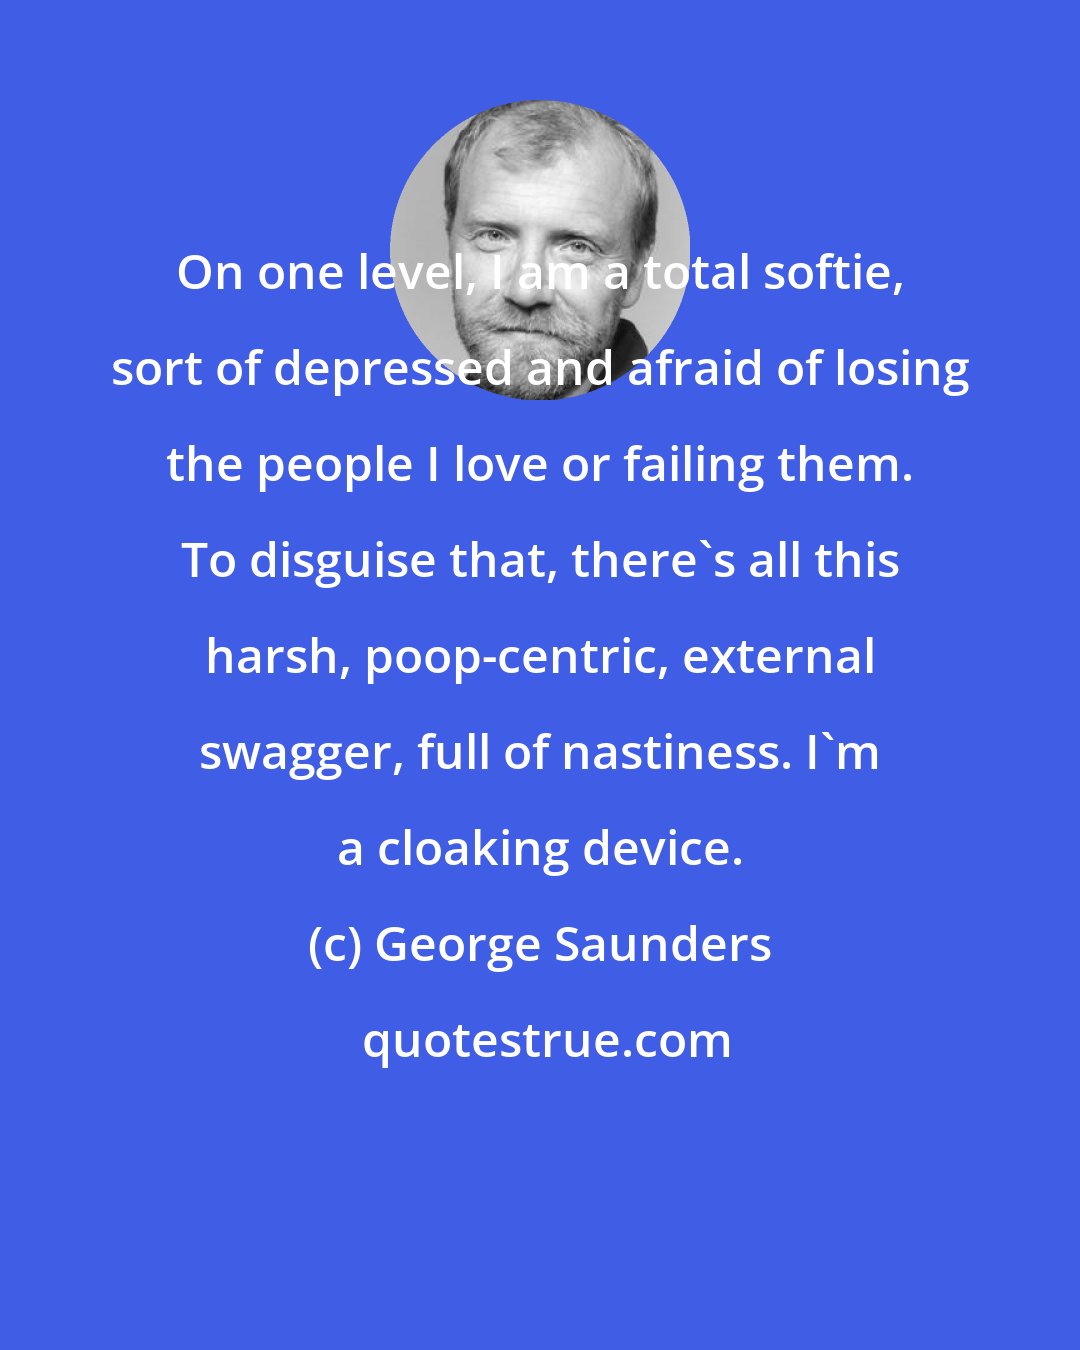 George Saunders: On one level, I am a total softie, sort of depressed and afraid of losing the people I love or failing them. To disguise that, there's all this harsh, poop-centric, external swagger, full of nastiness. I'm a cloaking device.